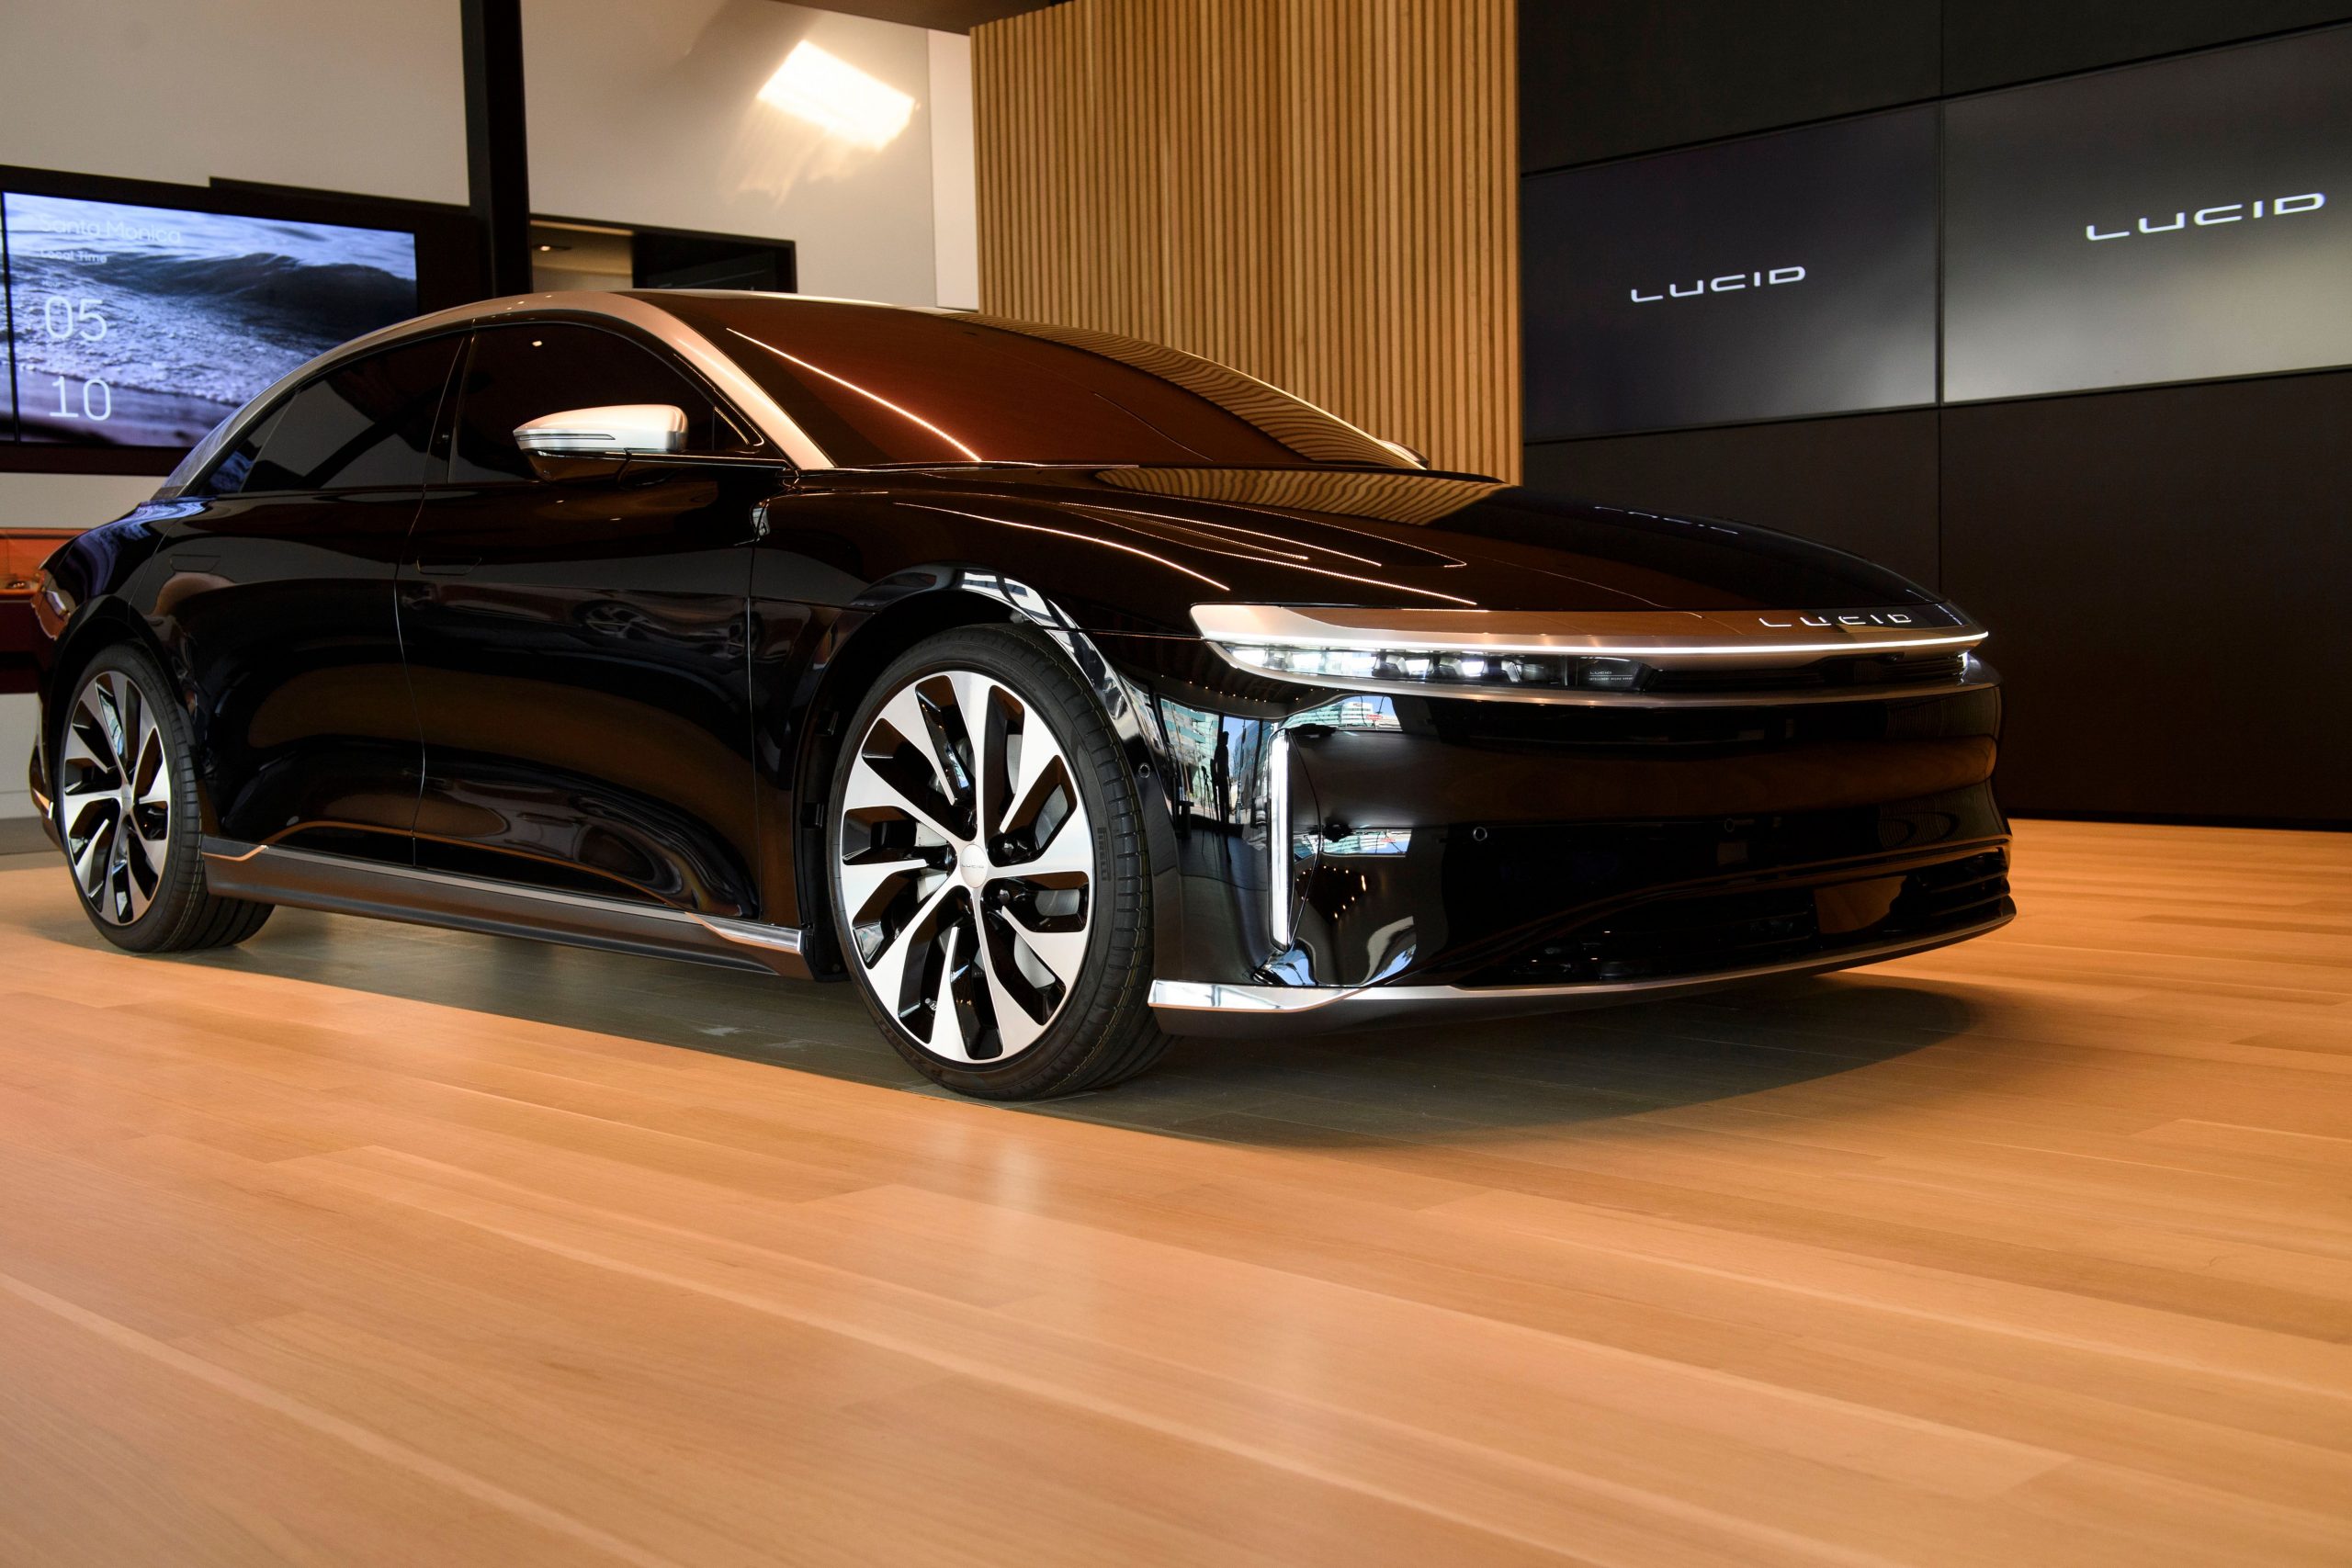 Lucid's new showrooms for their luxury EVs, based on the concept of post-luxury